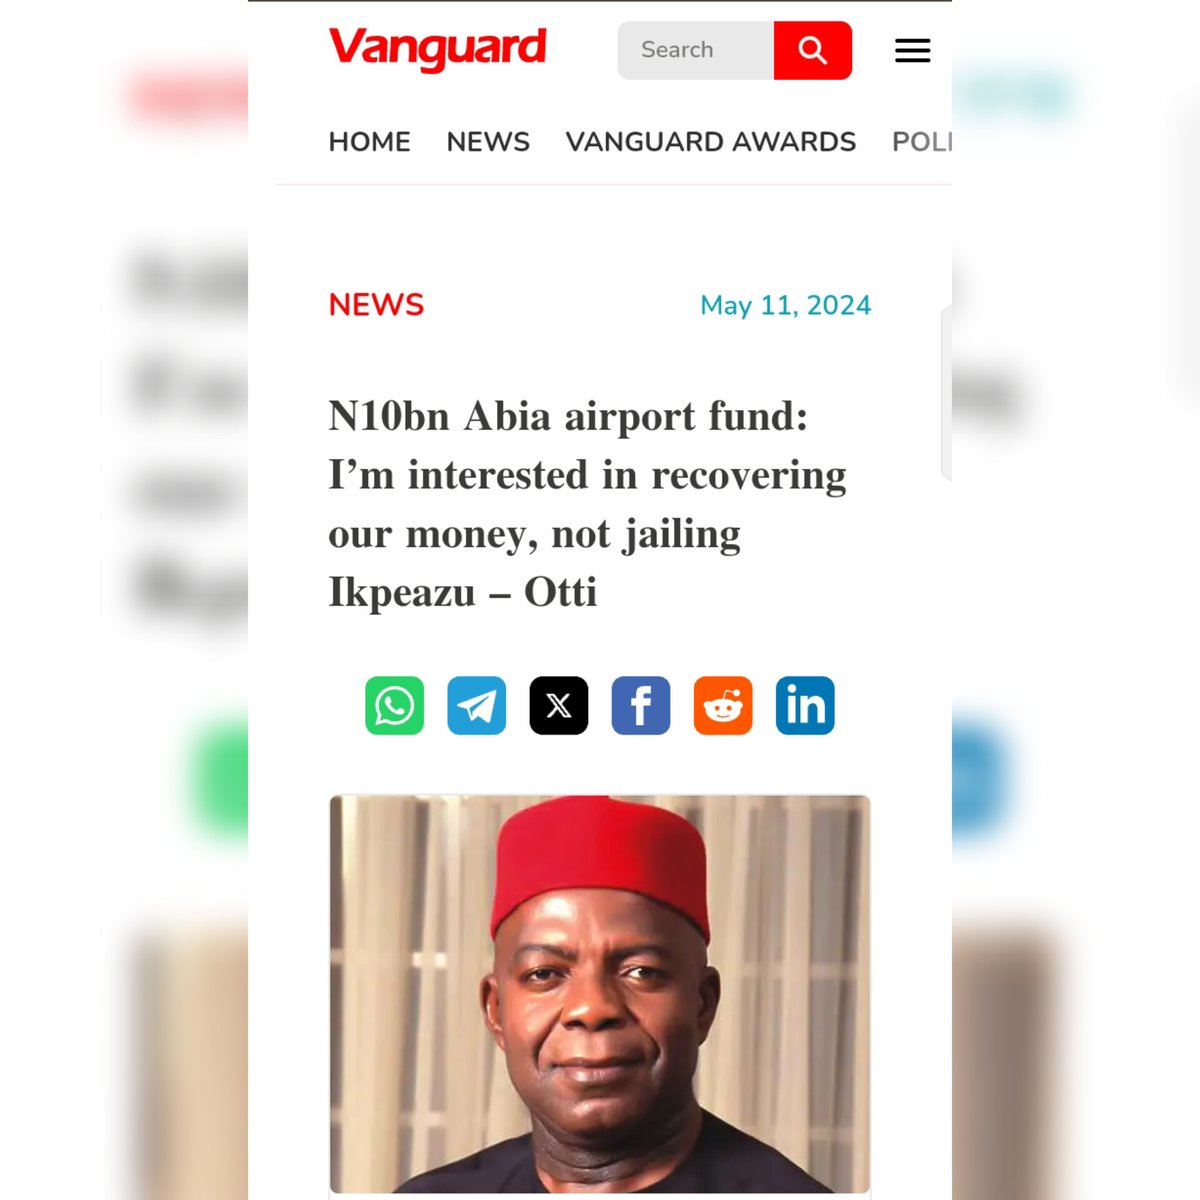 Harvest of frauds by the devourers! This is really heart-wrenching! The devastating part is that this monumental fraud was committed when COVID-19 pandemic was ravaging the entire humanity, and Abia State in particular. What is more deserving of a death sentence than this heinous